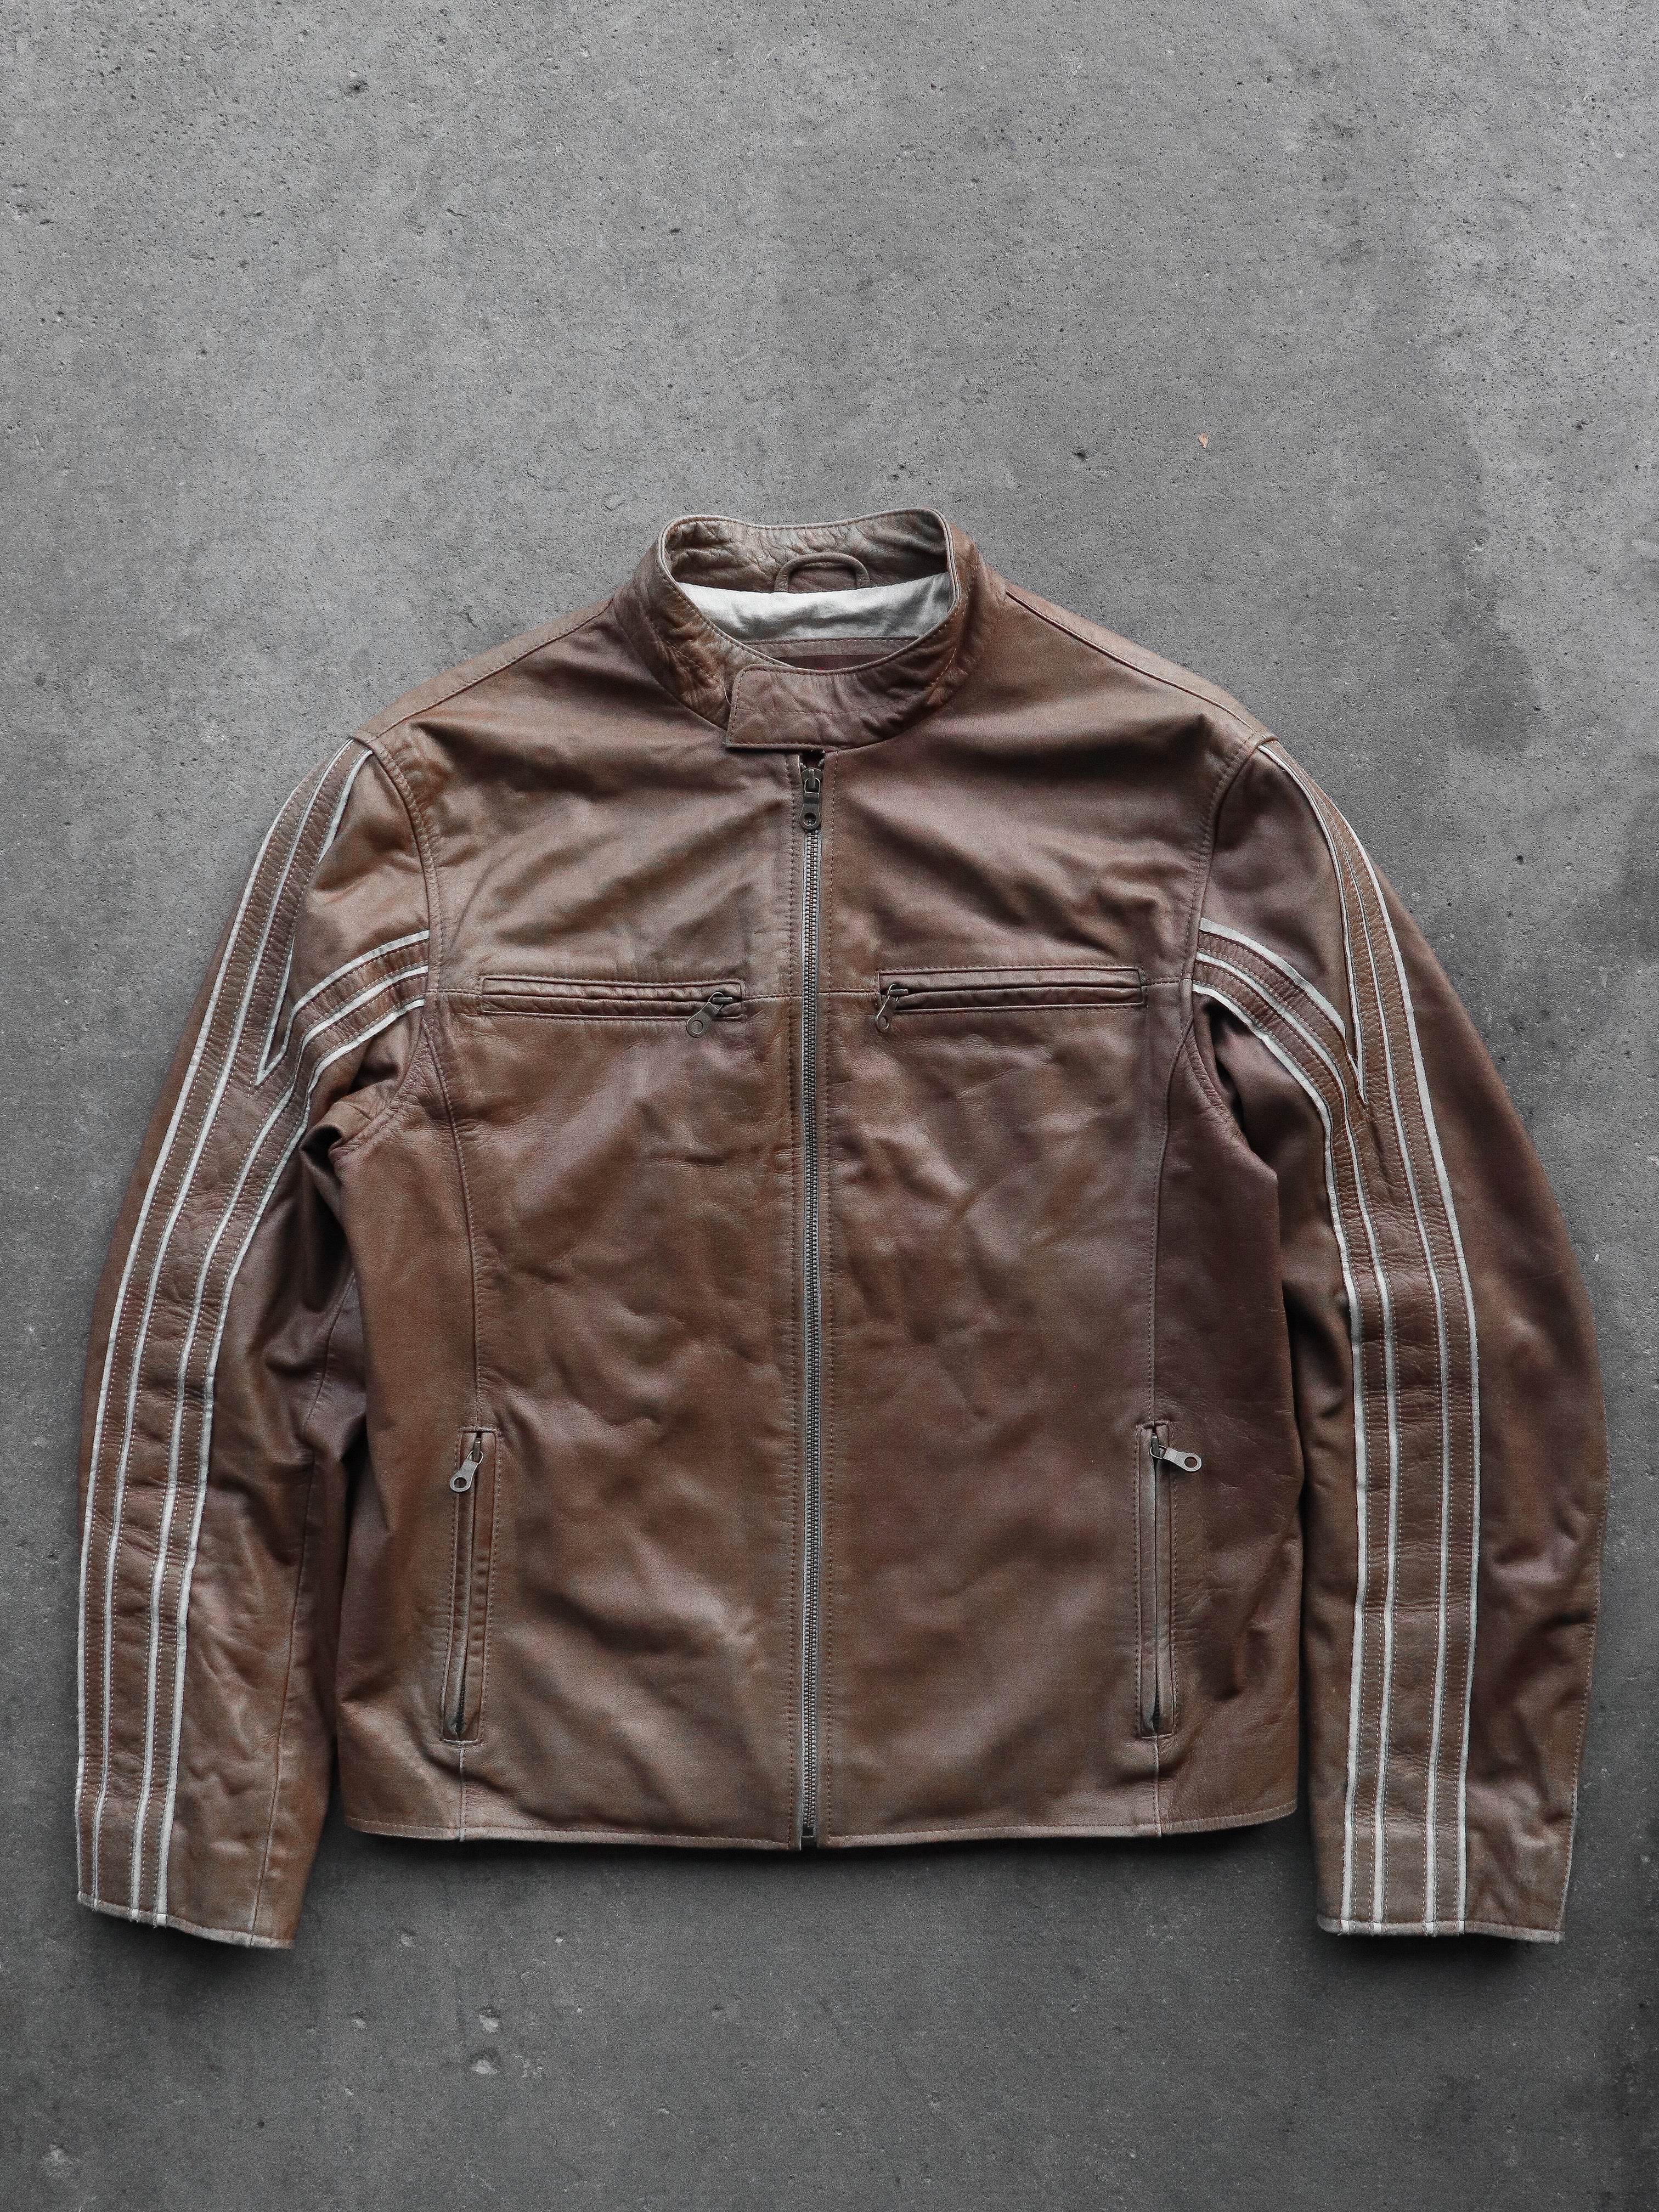 LEATHER ASH BROWN MOTO JACKET - 1990S – LOST ENDS FOUND